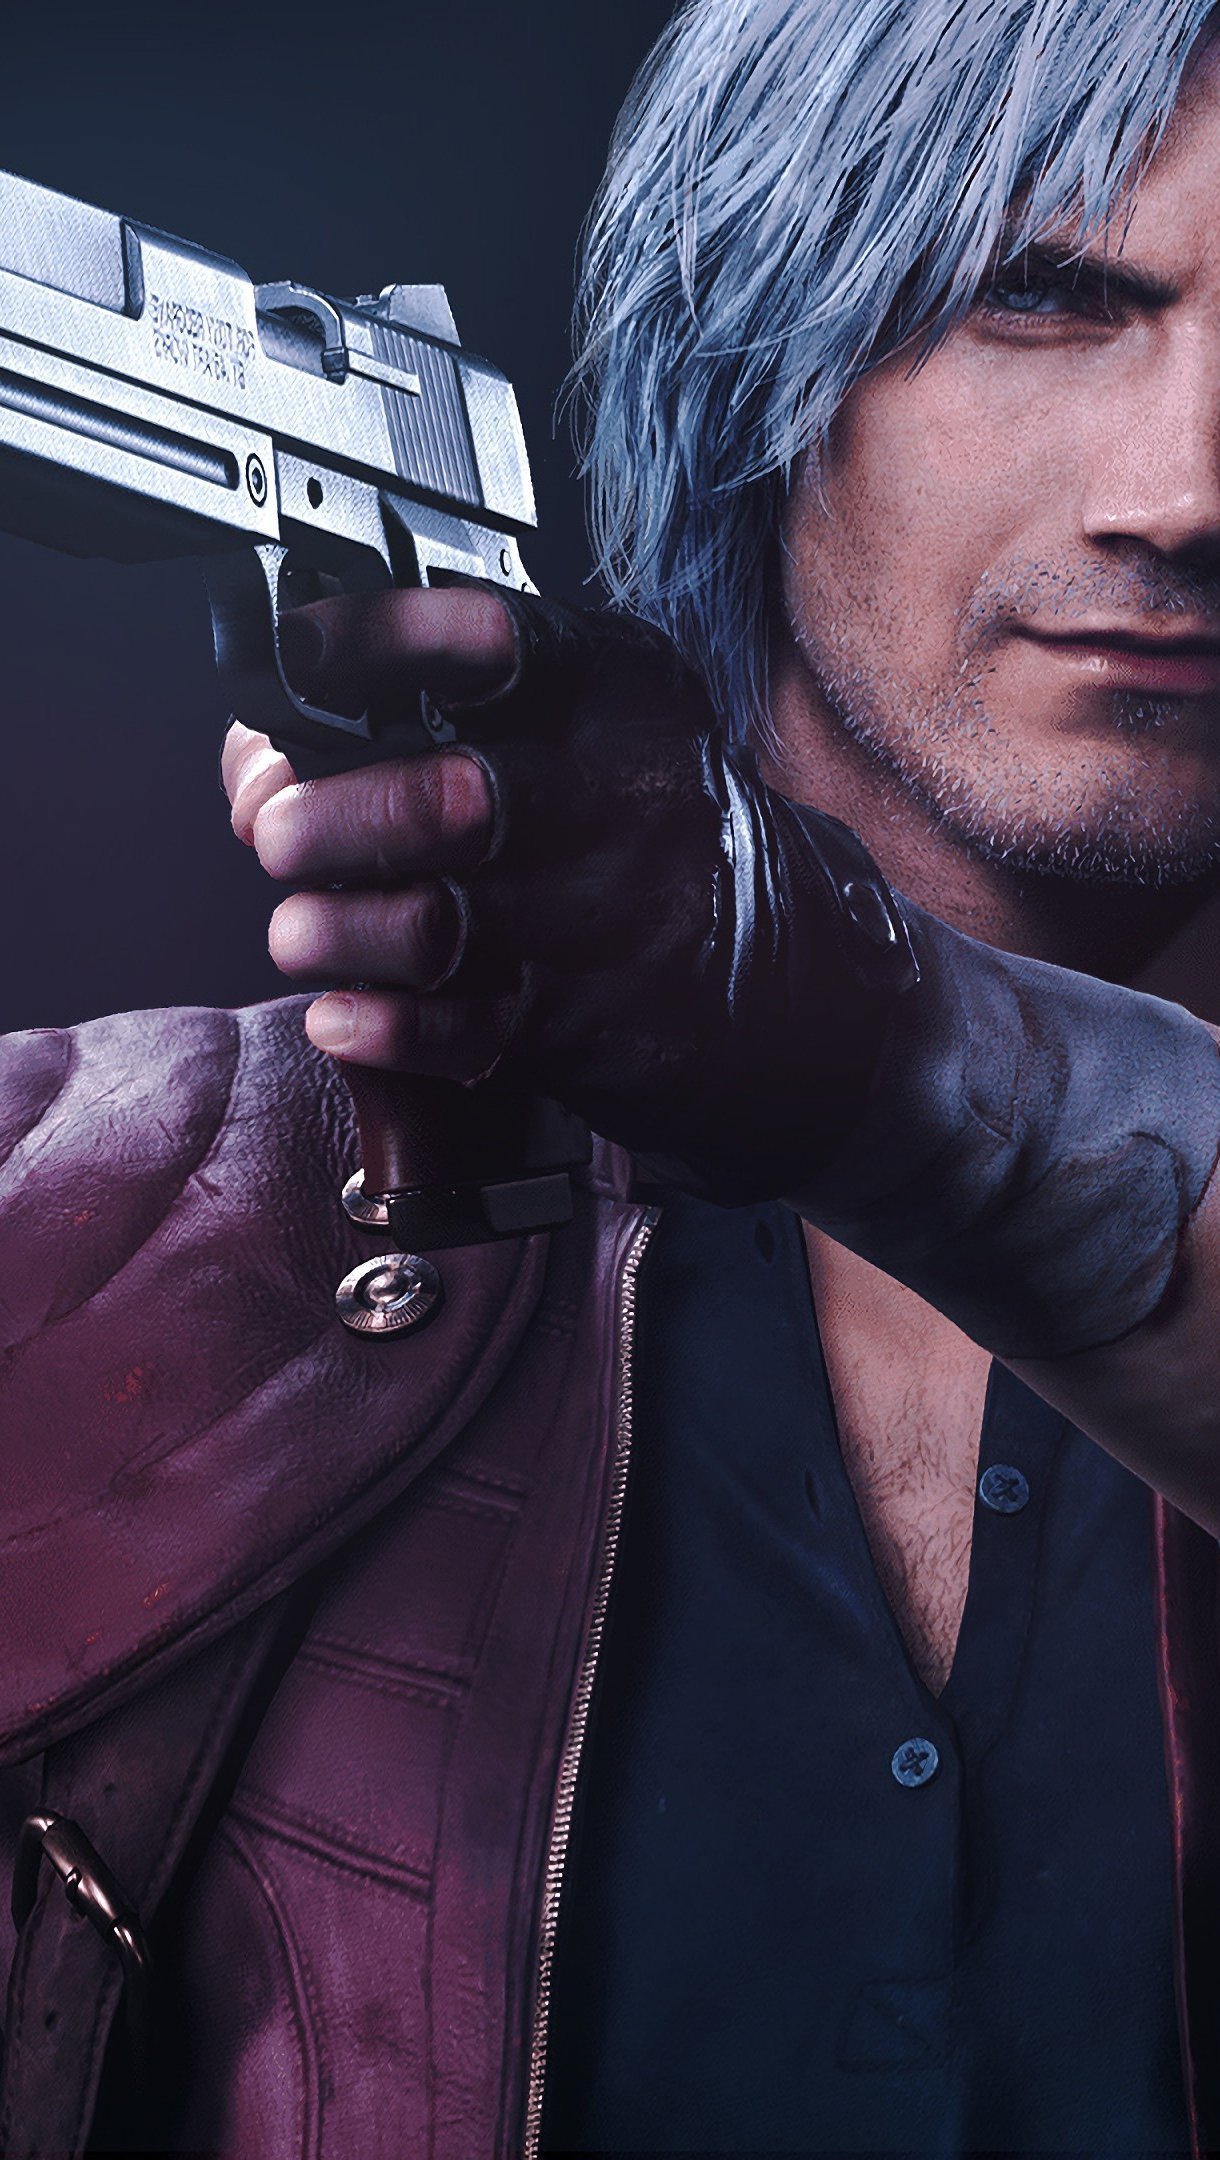 Dante Devil May Cry Wallpaper APK for Android Download